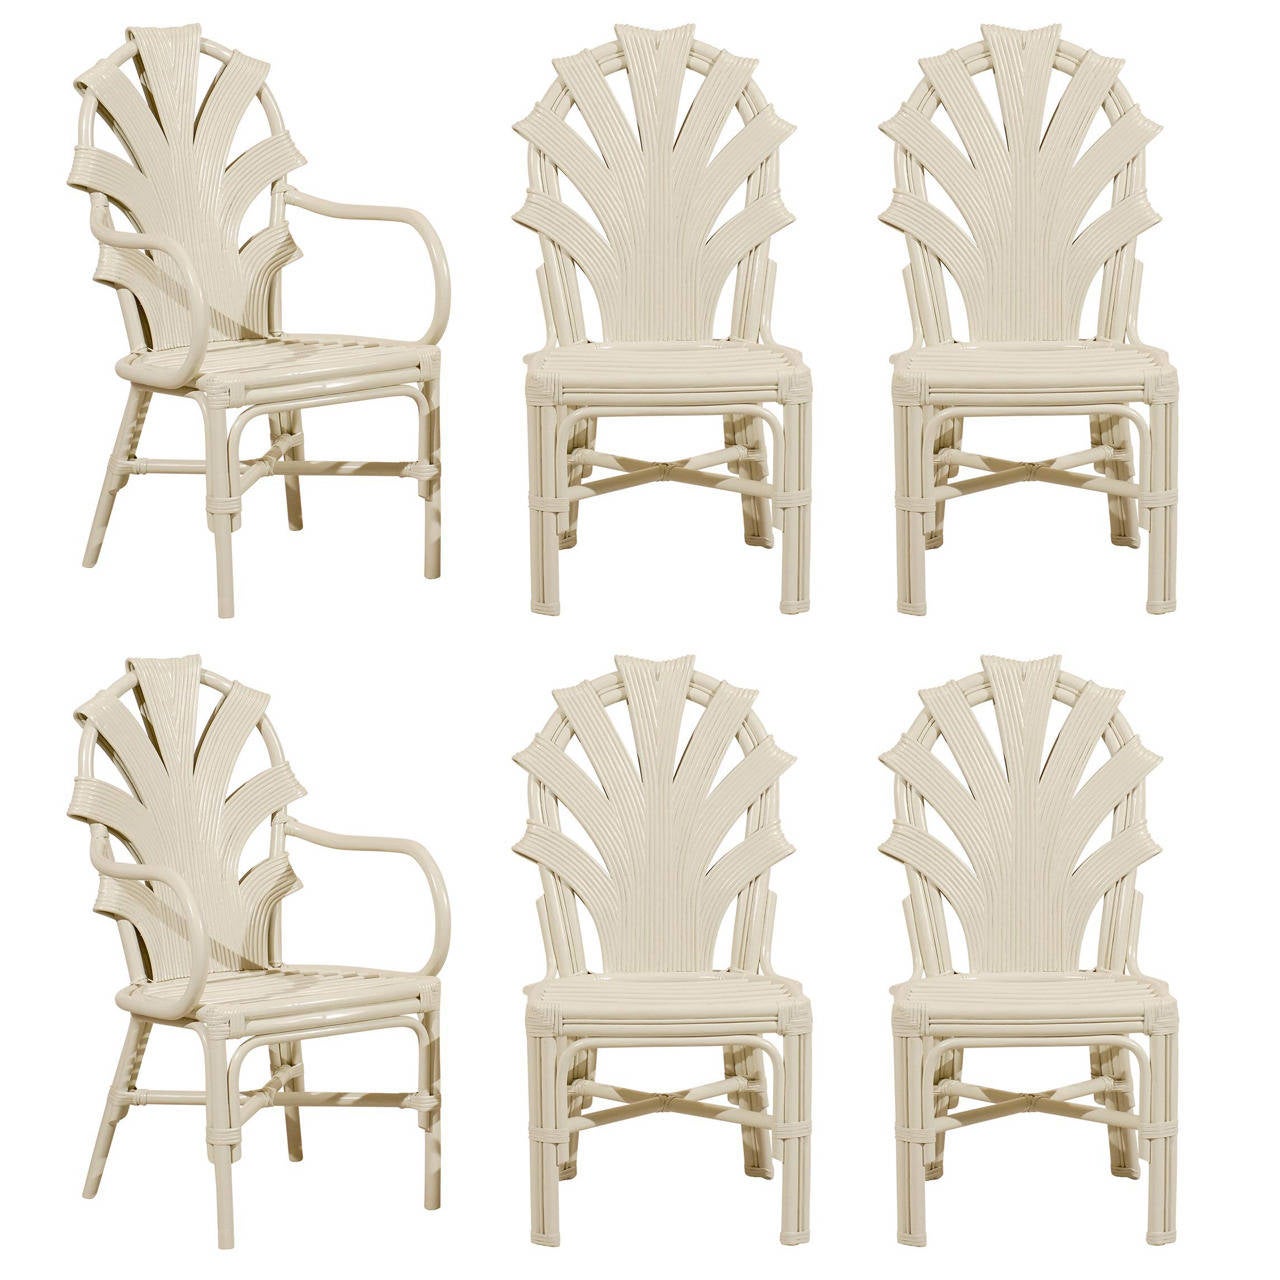 Exceptional Set of Six Vintage Rattan Dining Chairs in Cream Lacquer at